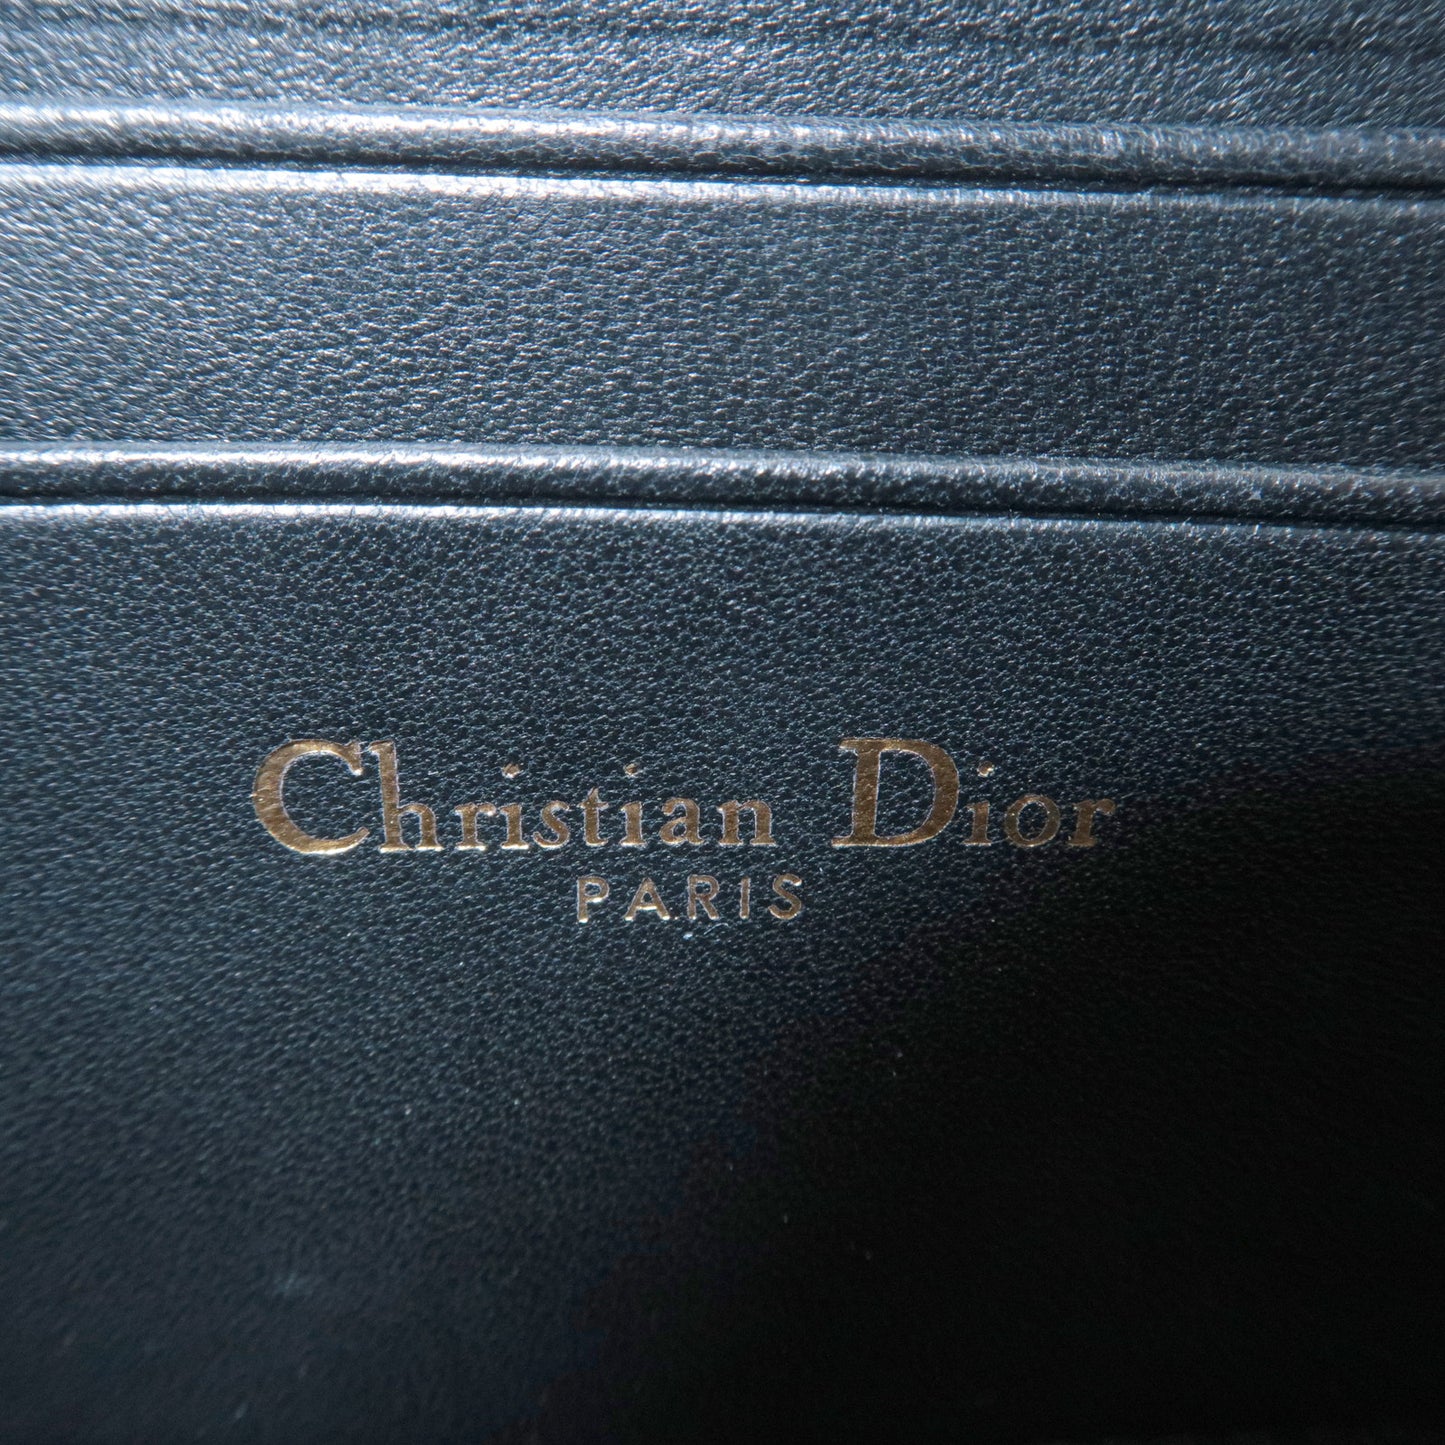 Christian Dior Cannage Lady Dior Leather Small Zip Coin Case Black